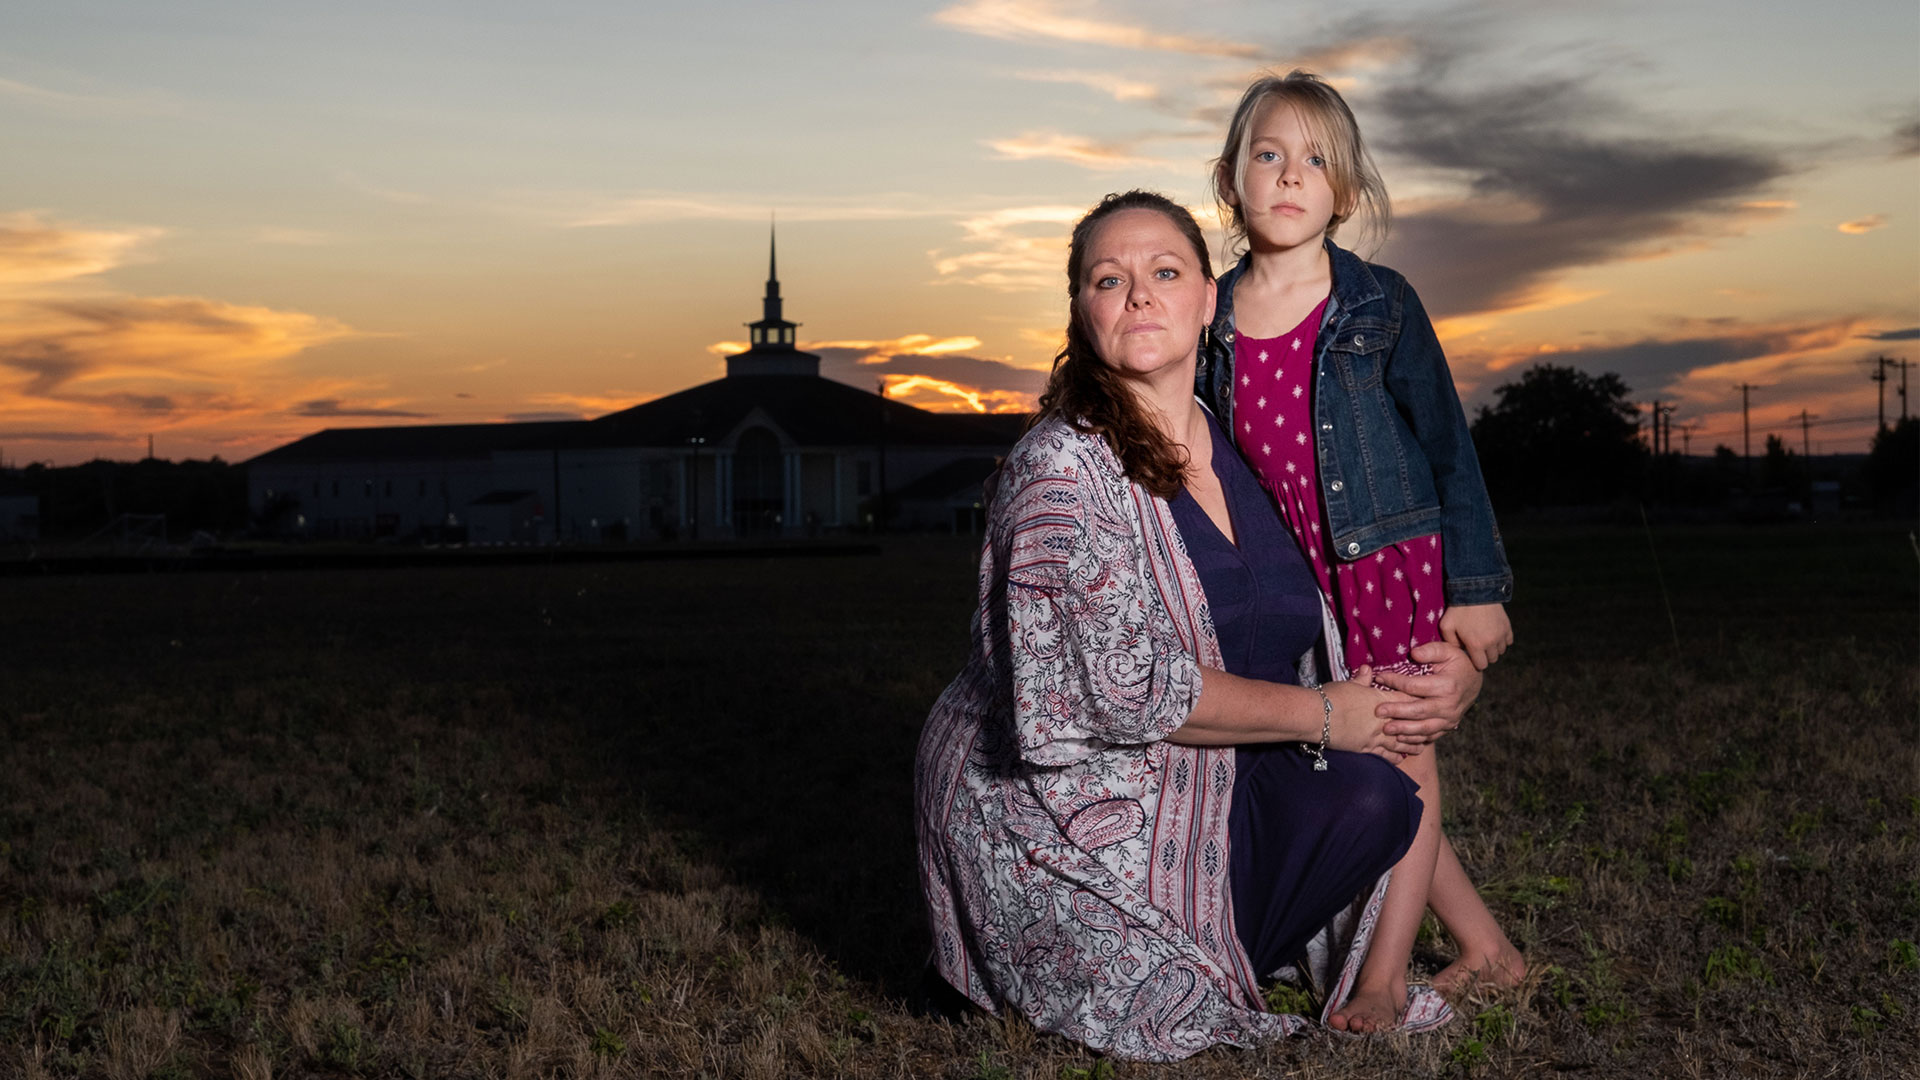 Kimberley and daughter Kai stand in front of a church at sunset